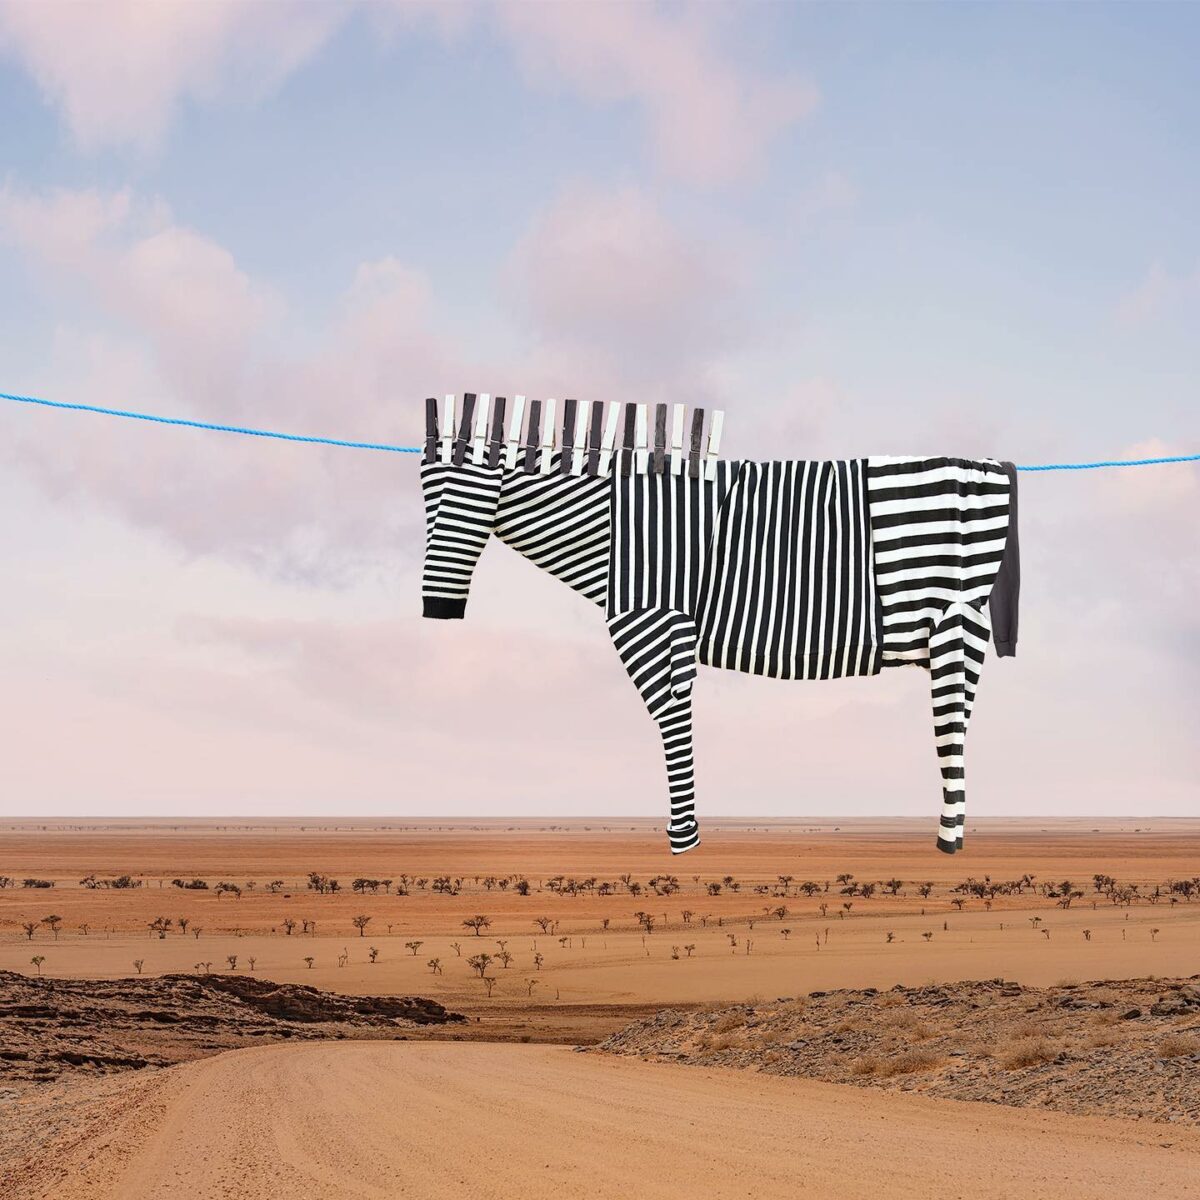 New Playful Creative Photographs Made With Household Objects By Helga Stentzel (7)